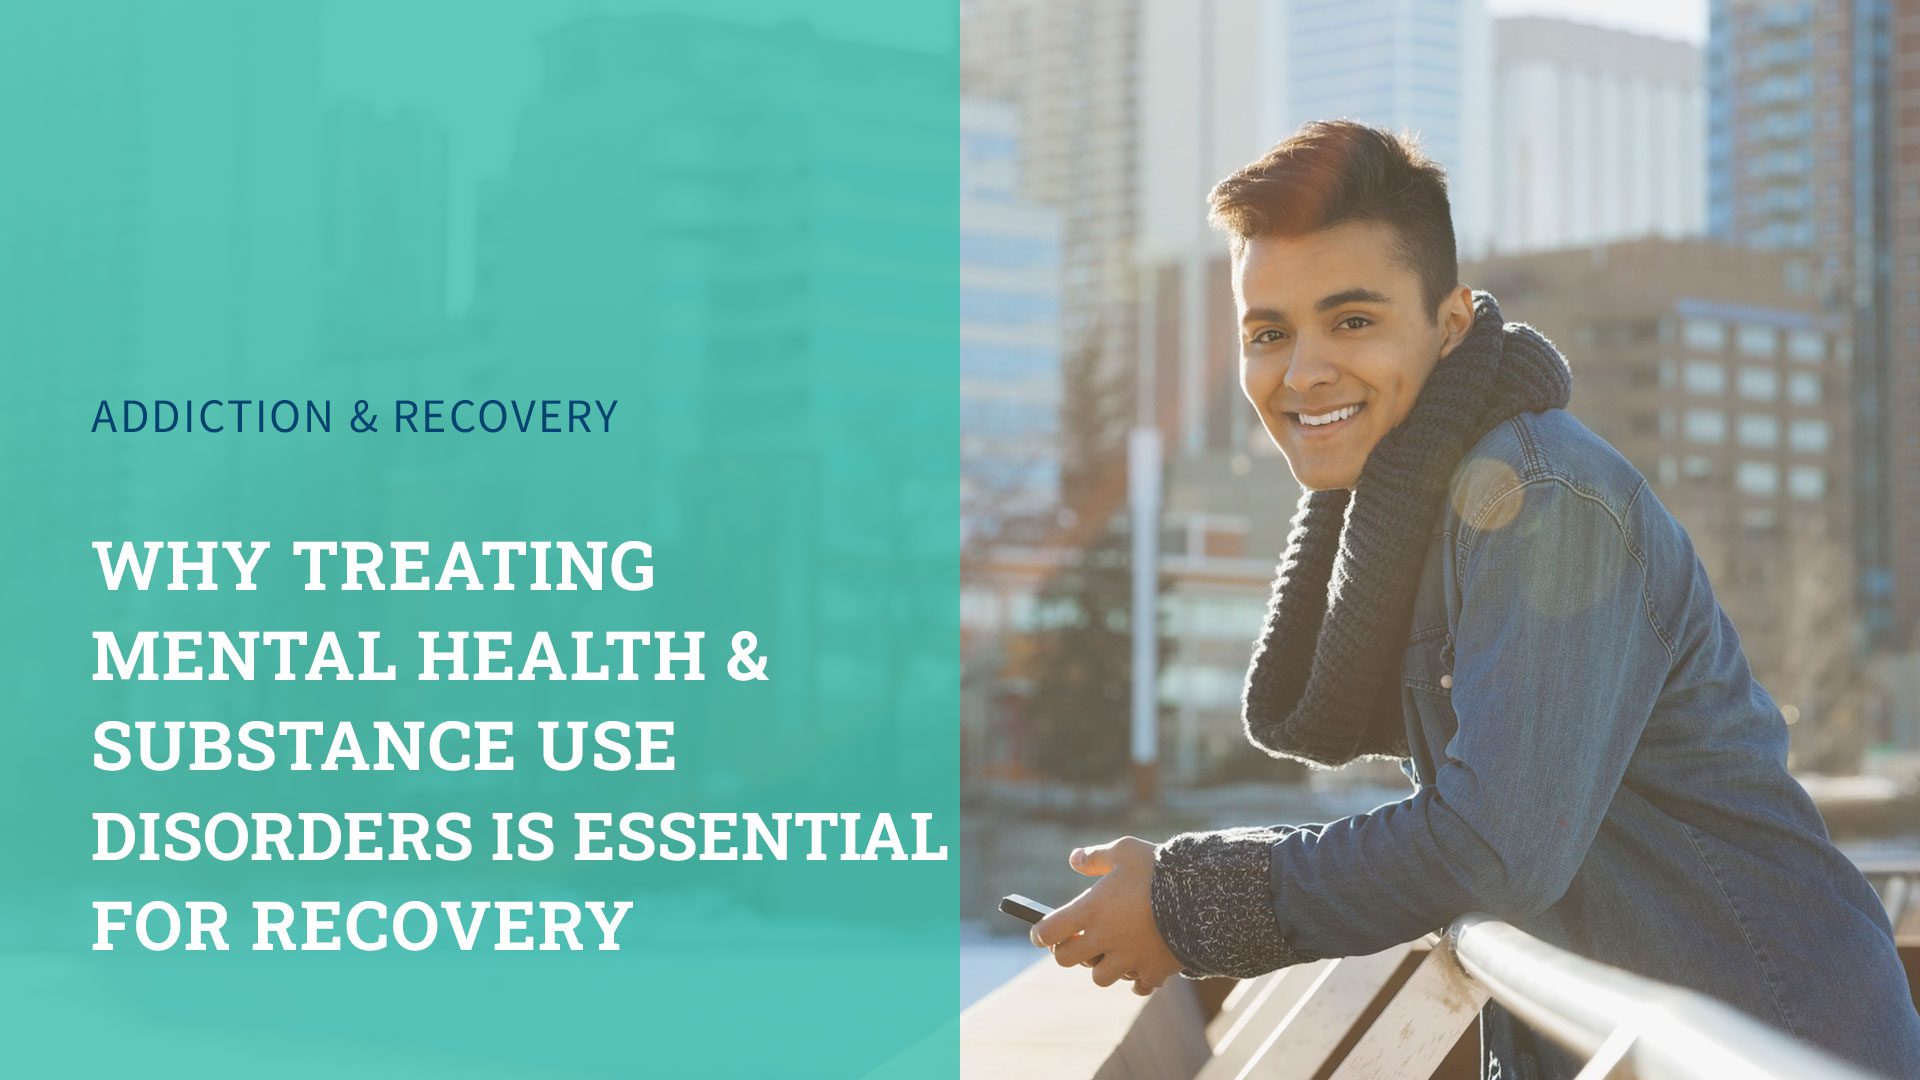 Mental Health Disorders and Substance Use Disorders: Why Treating Both is Essential for Recovery